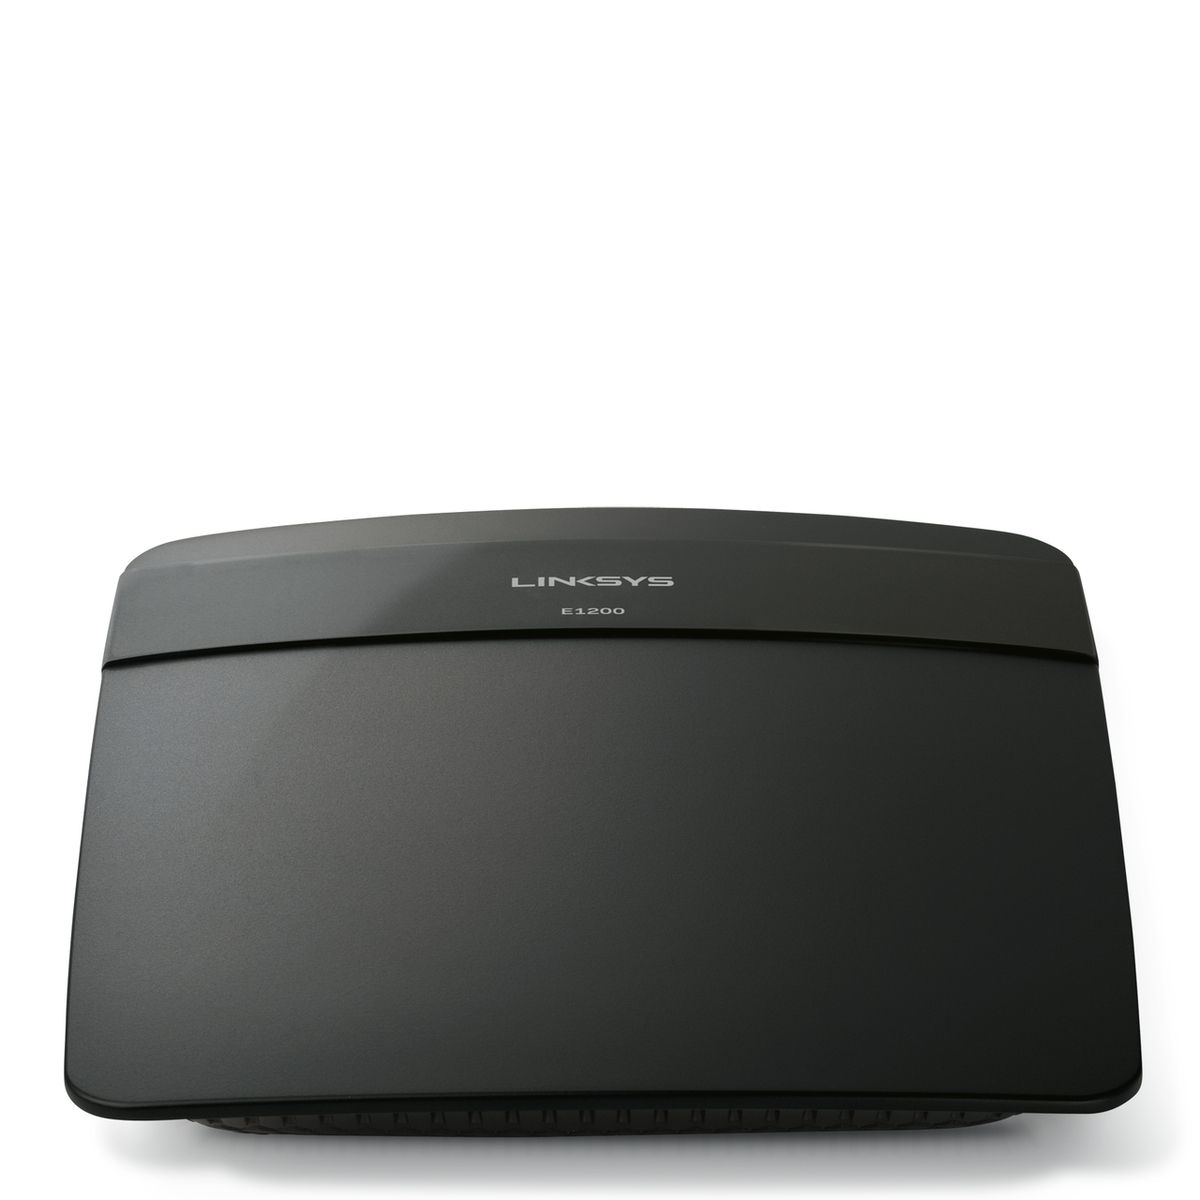 how-do-i-find-my-passcode-for-cisco-linksys-e1200-wireless-router